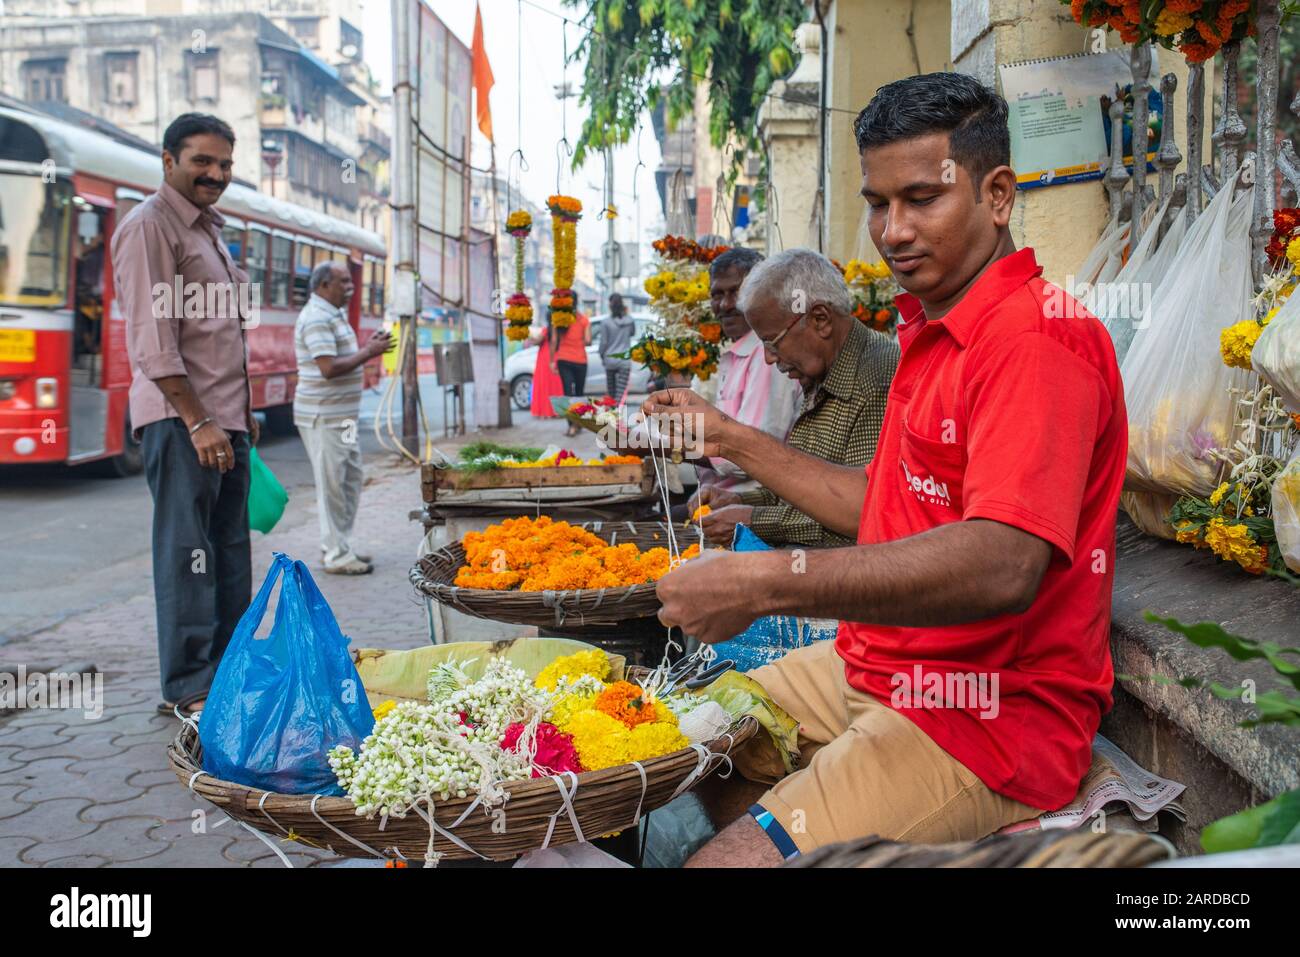 Mumbai, India - December 17, 2017: Vendors preparing marigold necklaces in front of a passerby in a busy street Stock Photo